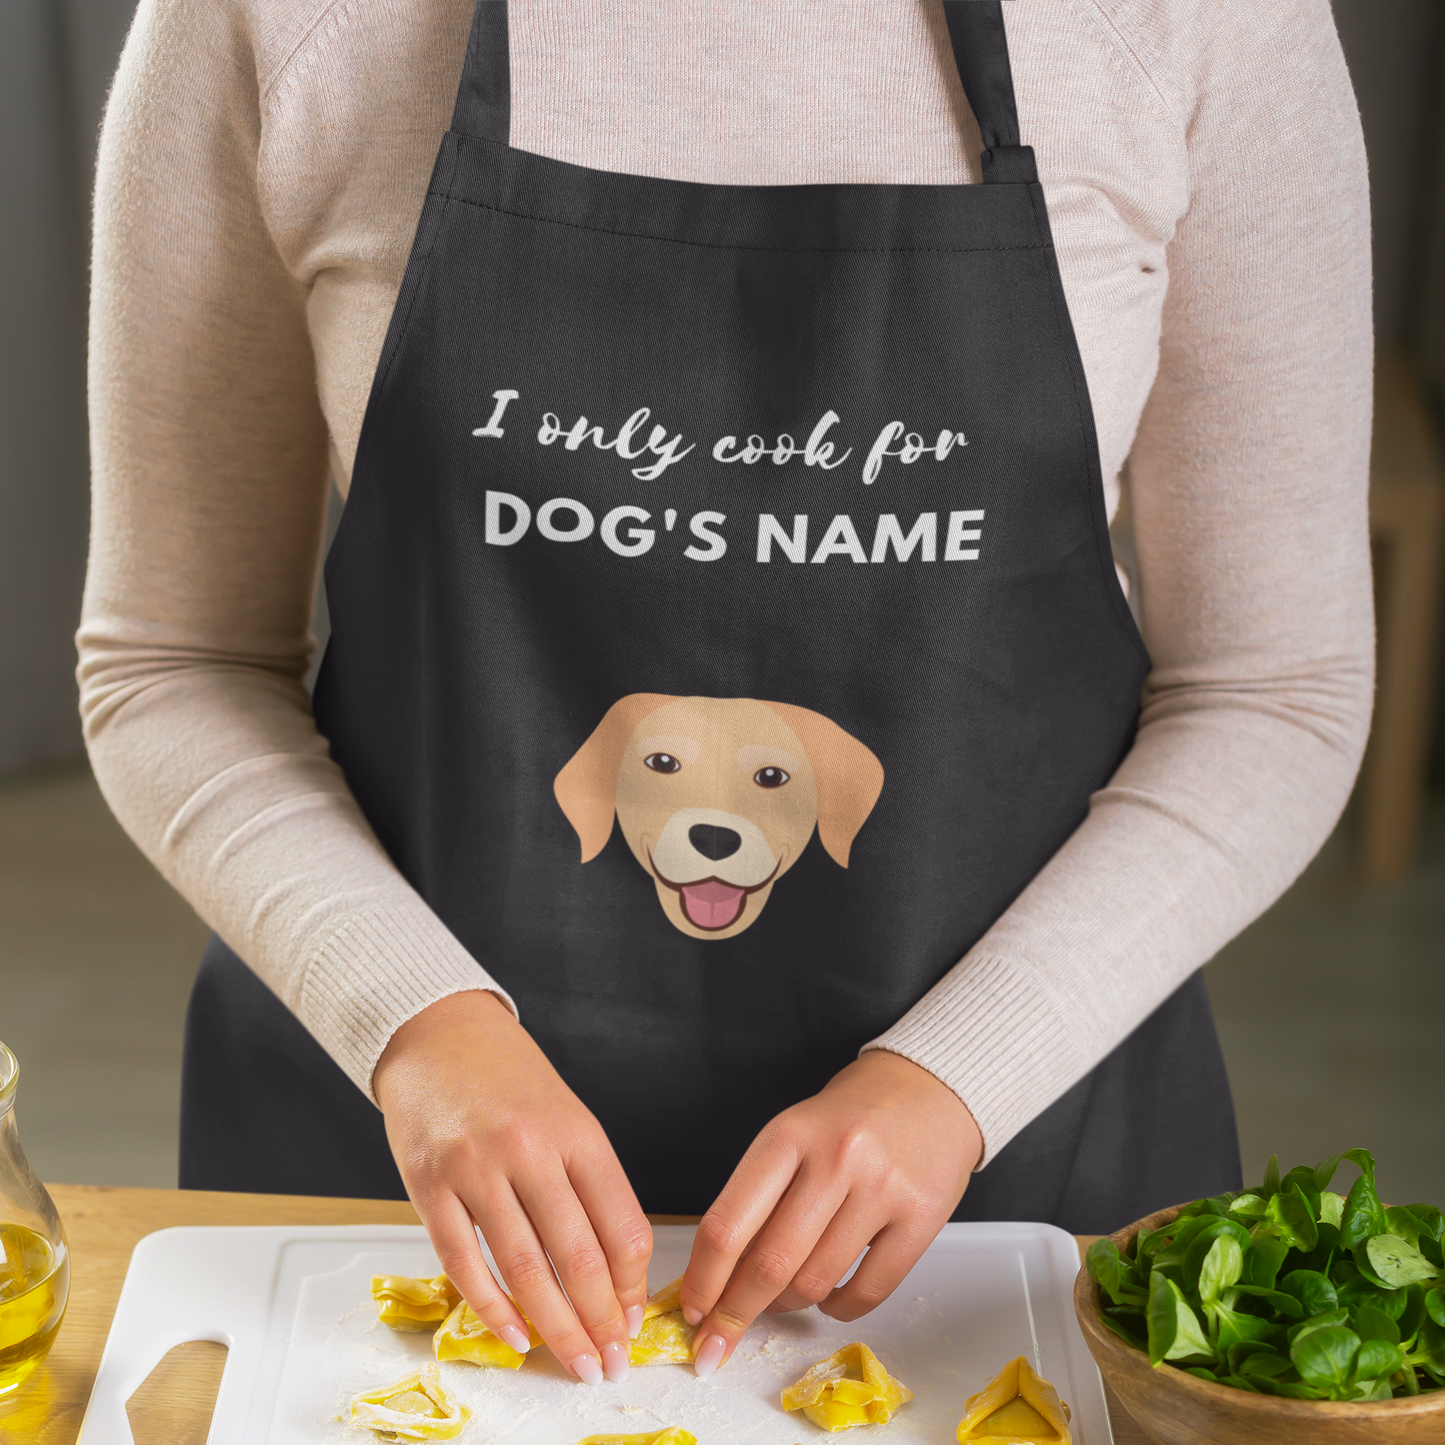 Personalised Apron for Labrador Yellow 1 Parents - I only cook for my "dog's name) Premium Jersey Apron